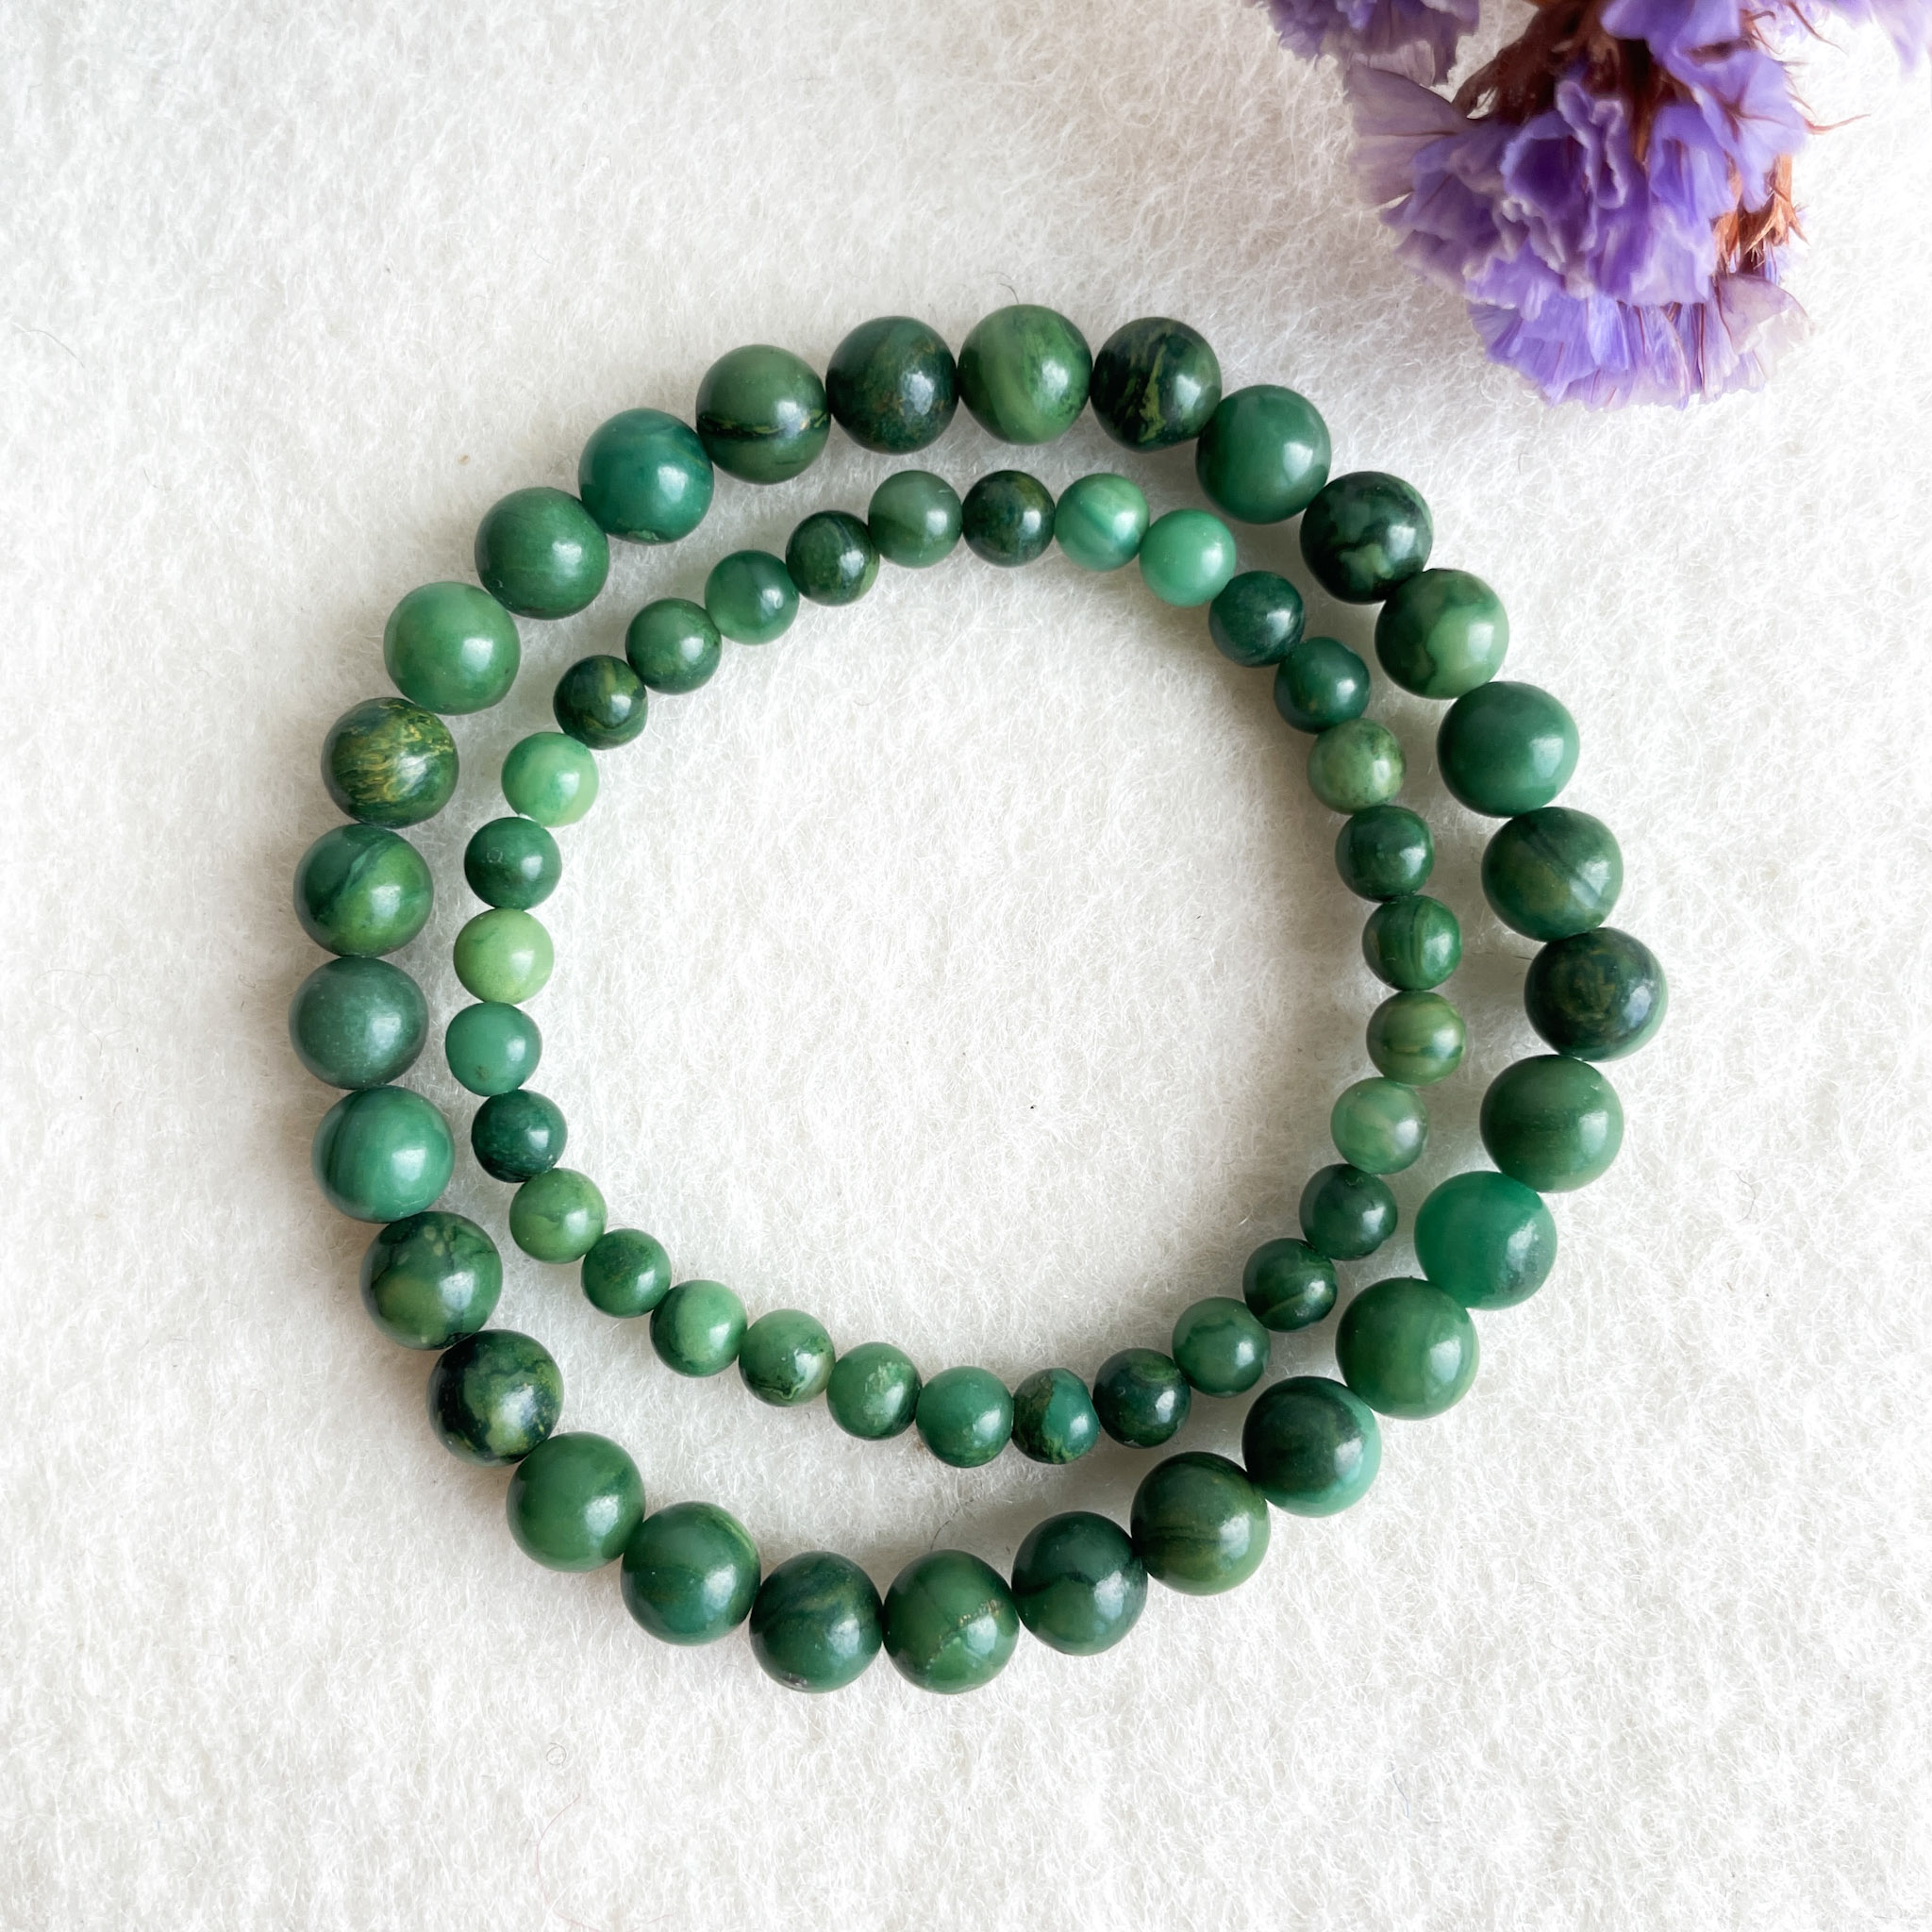 A green stone bead necklace arranged in a spiral shape on a white background with a blurred purple flower in the corner.